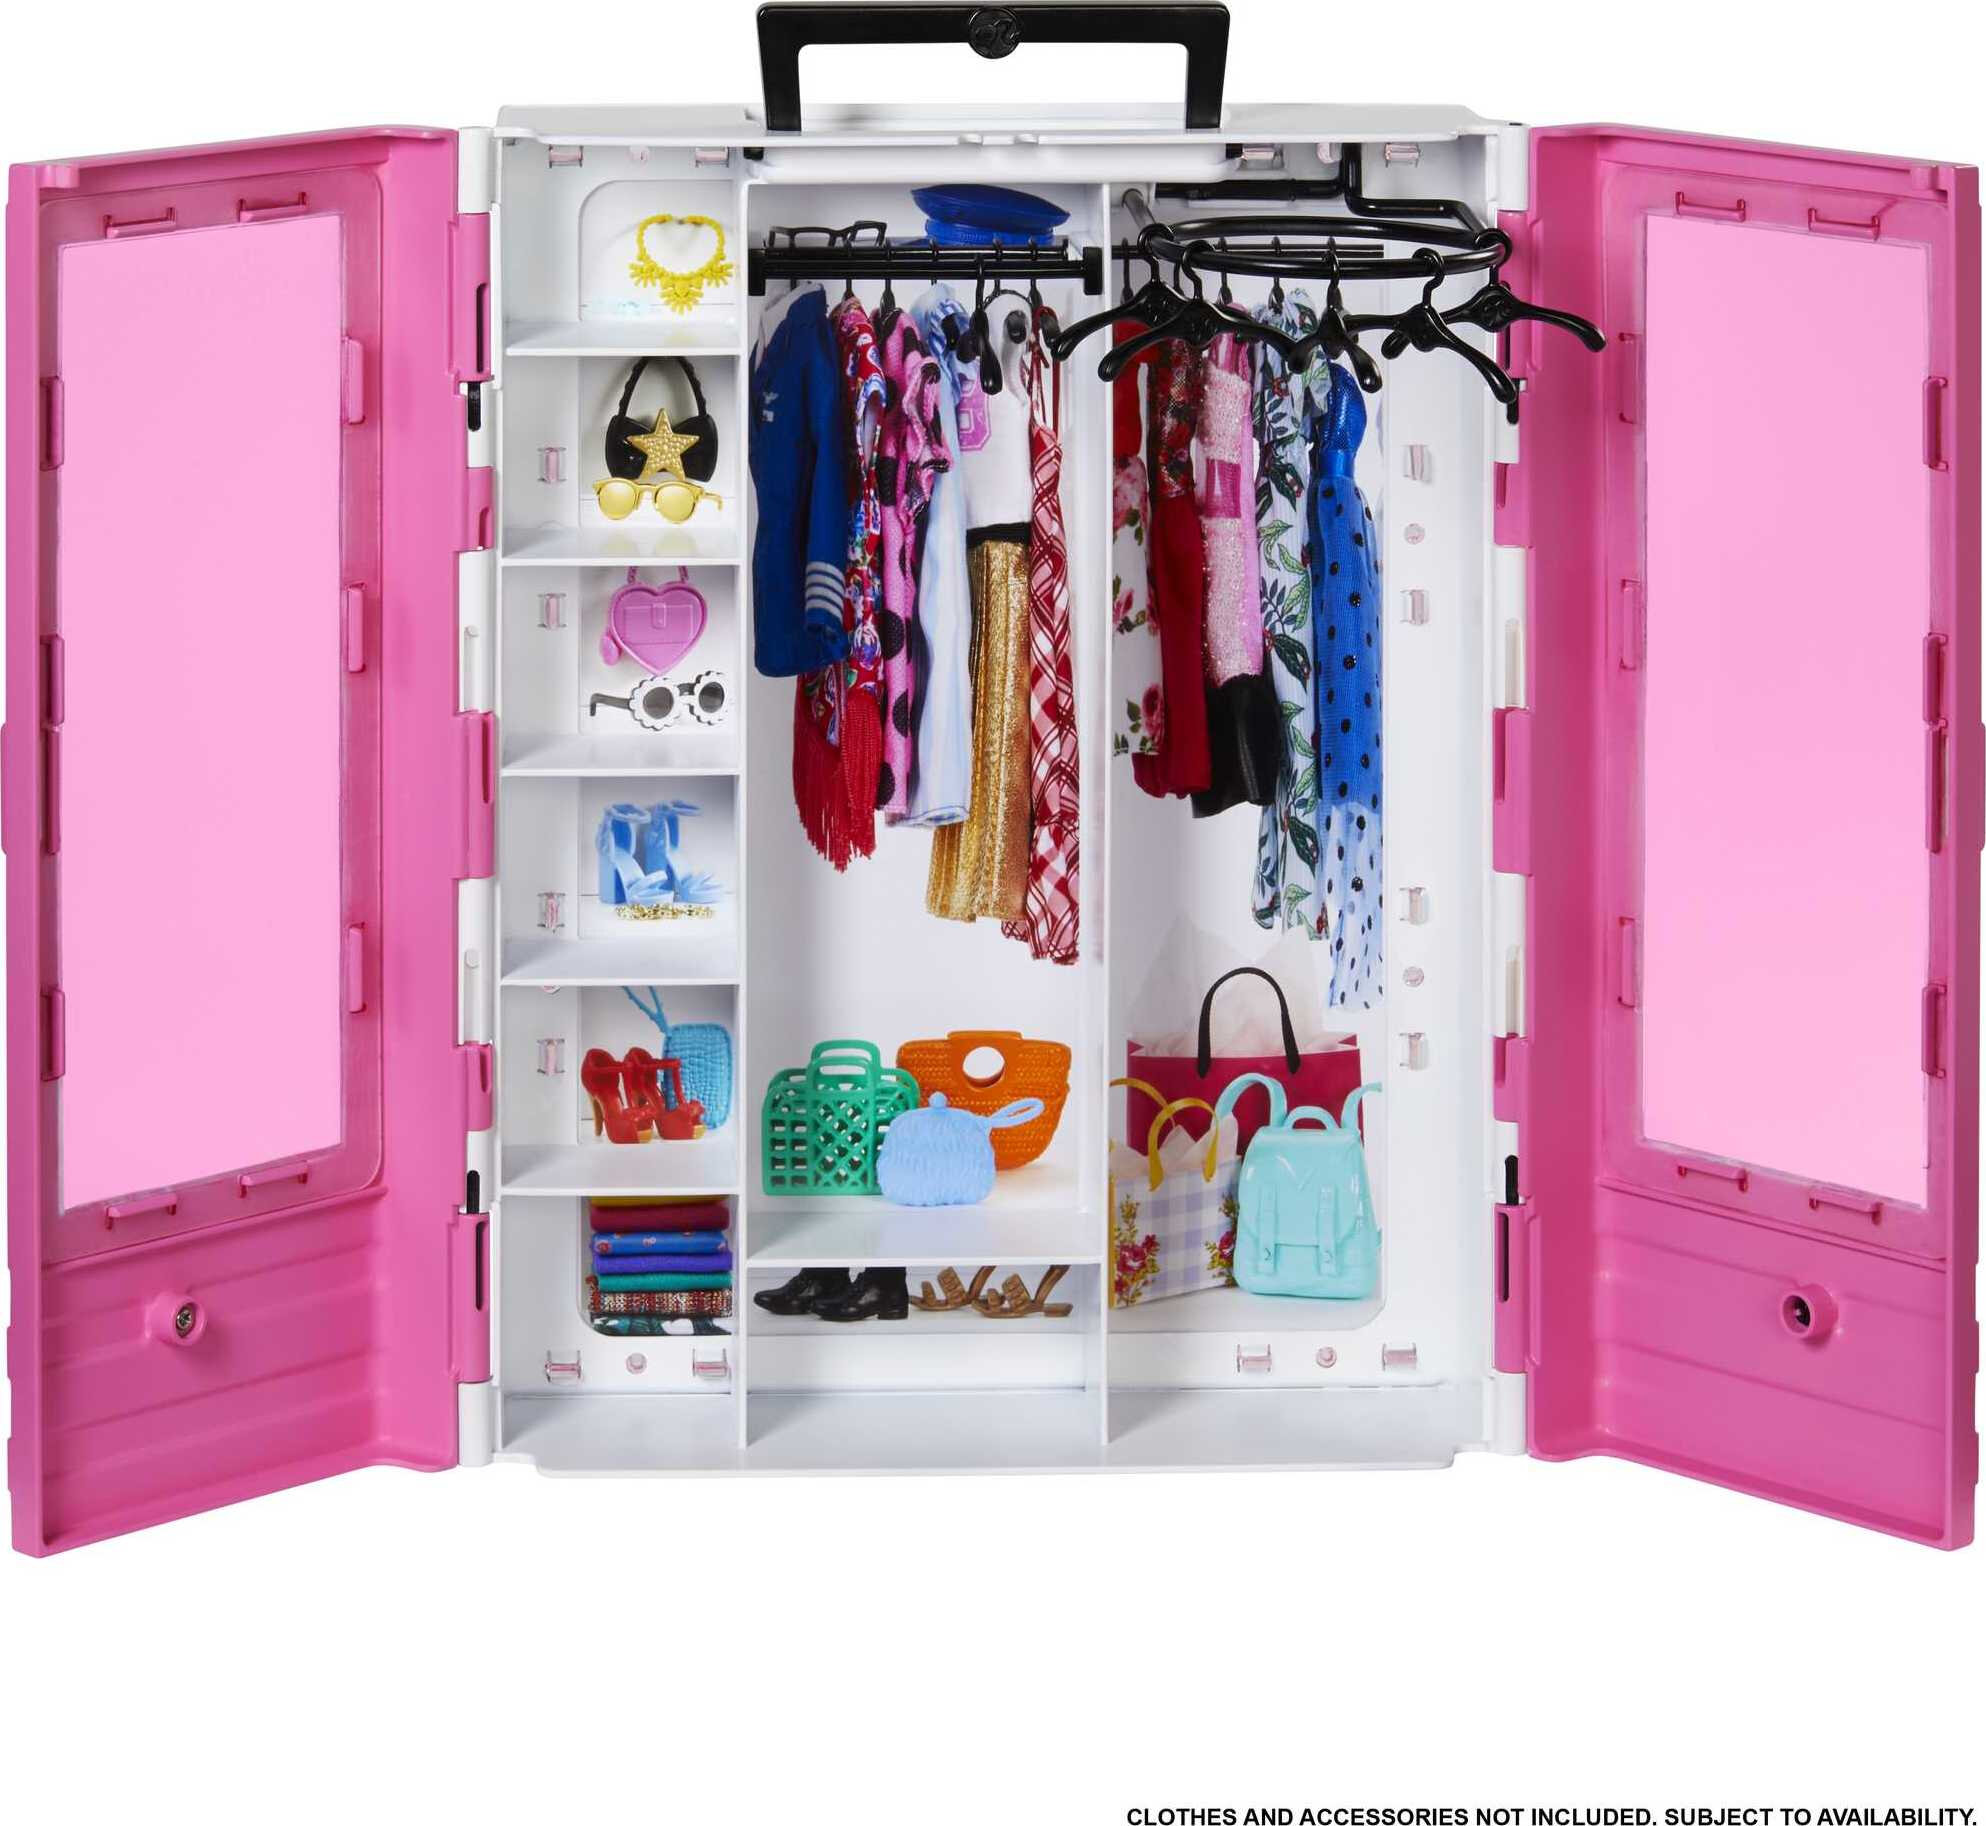 Barbie Fashionista Ultimate Closet Playset with Clothes & Accessories, Includes 5 Hangers - image 5 of 6